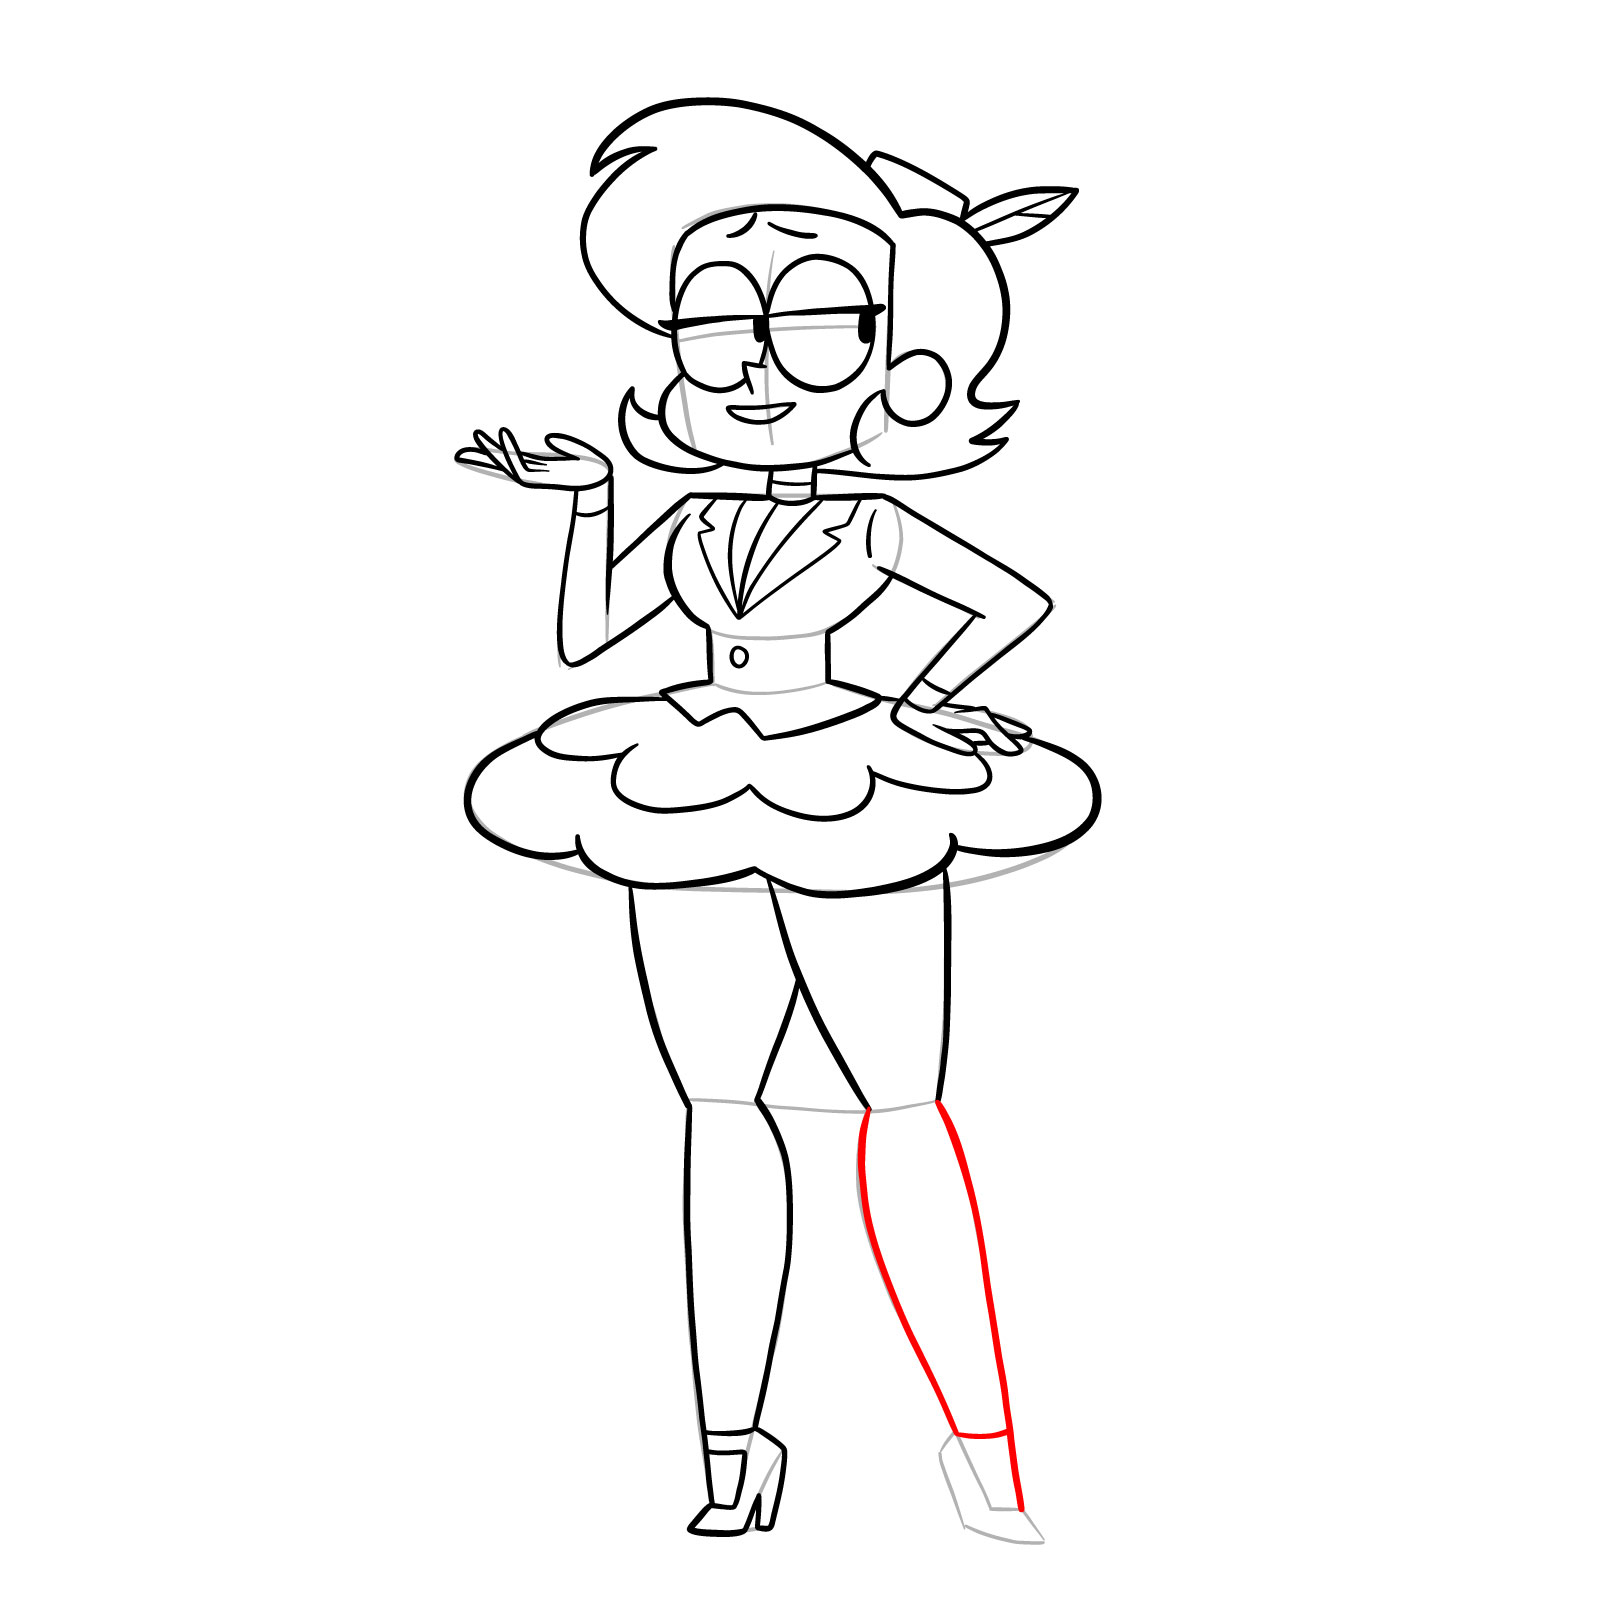 How to draw Elodie from OK K.O.! - step 34